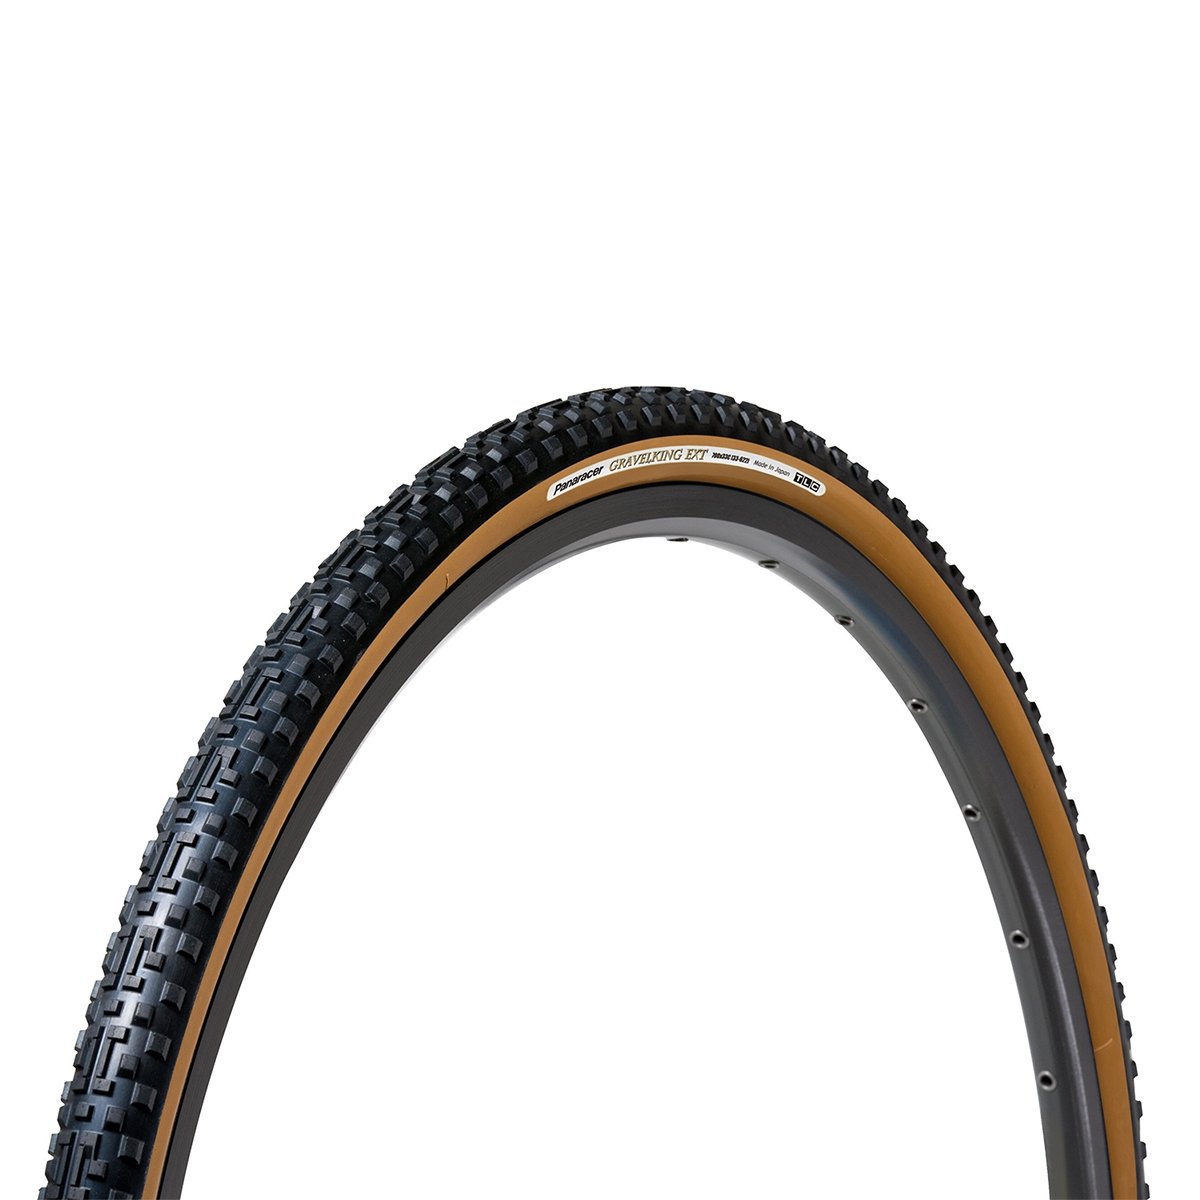 Panaracer - GravelKing EXT (Extreme Conditions) Folding Bicycle Tire